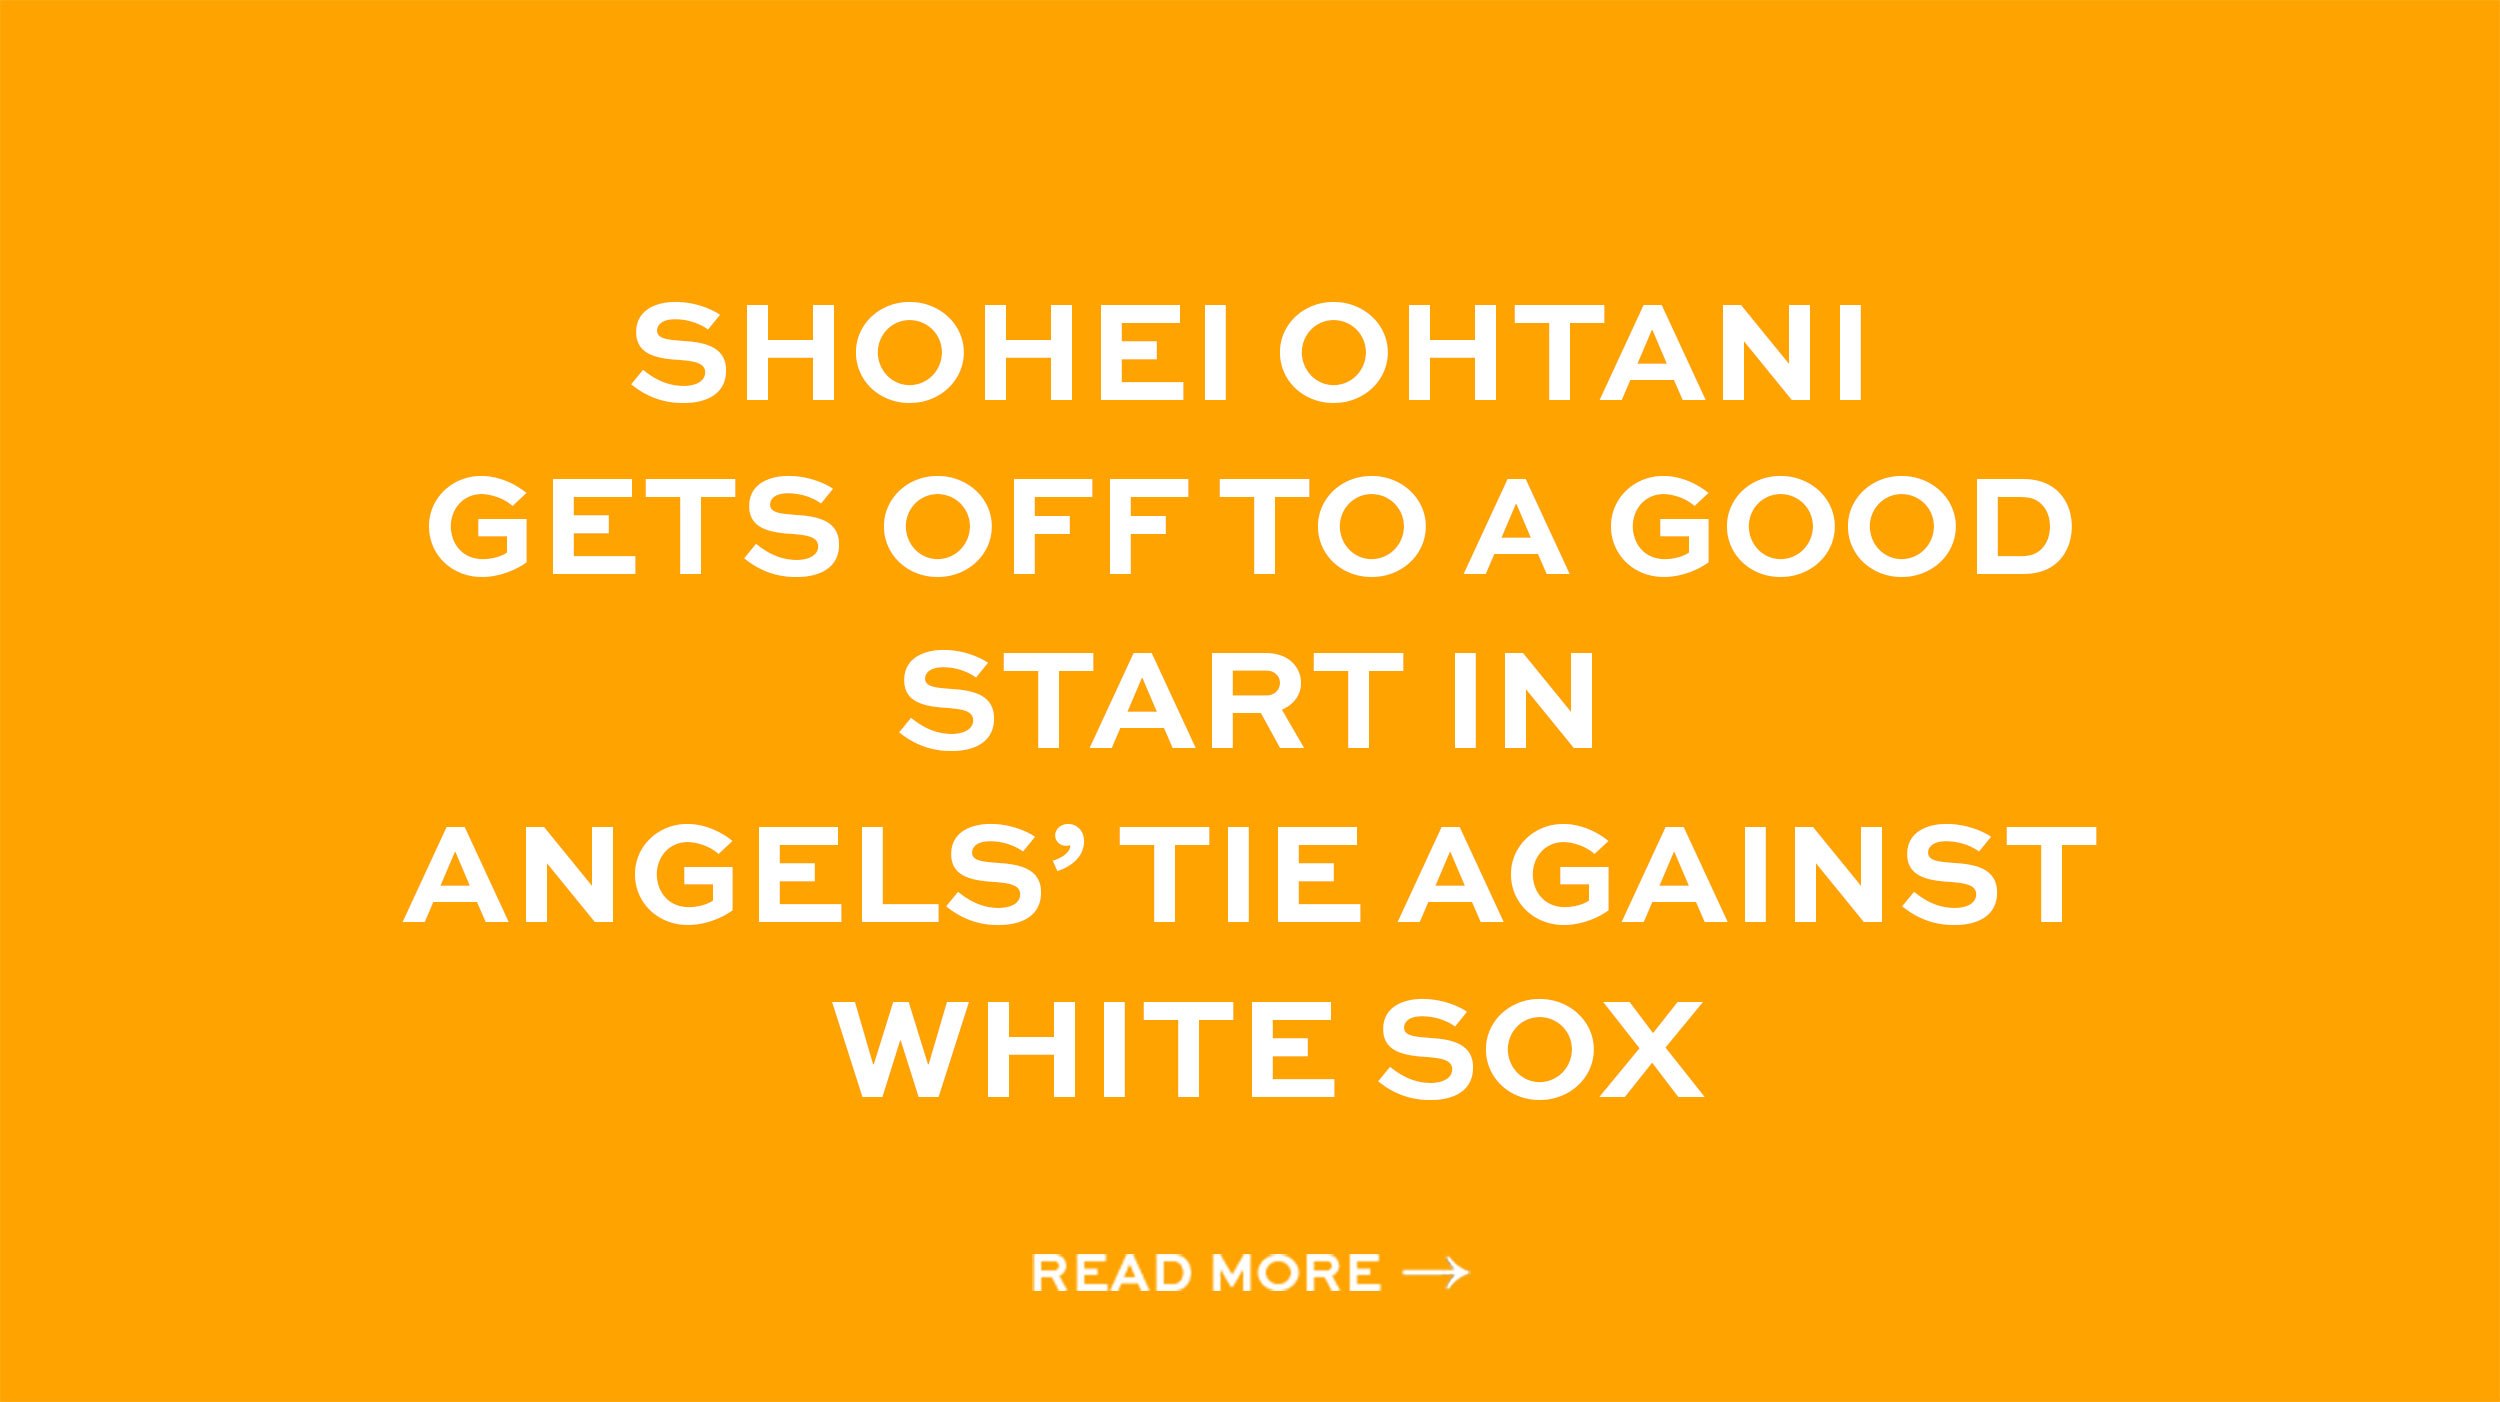 Shohei Ohtani gets off to a good start in Angels’ tie against White Sox